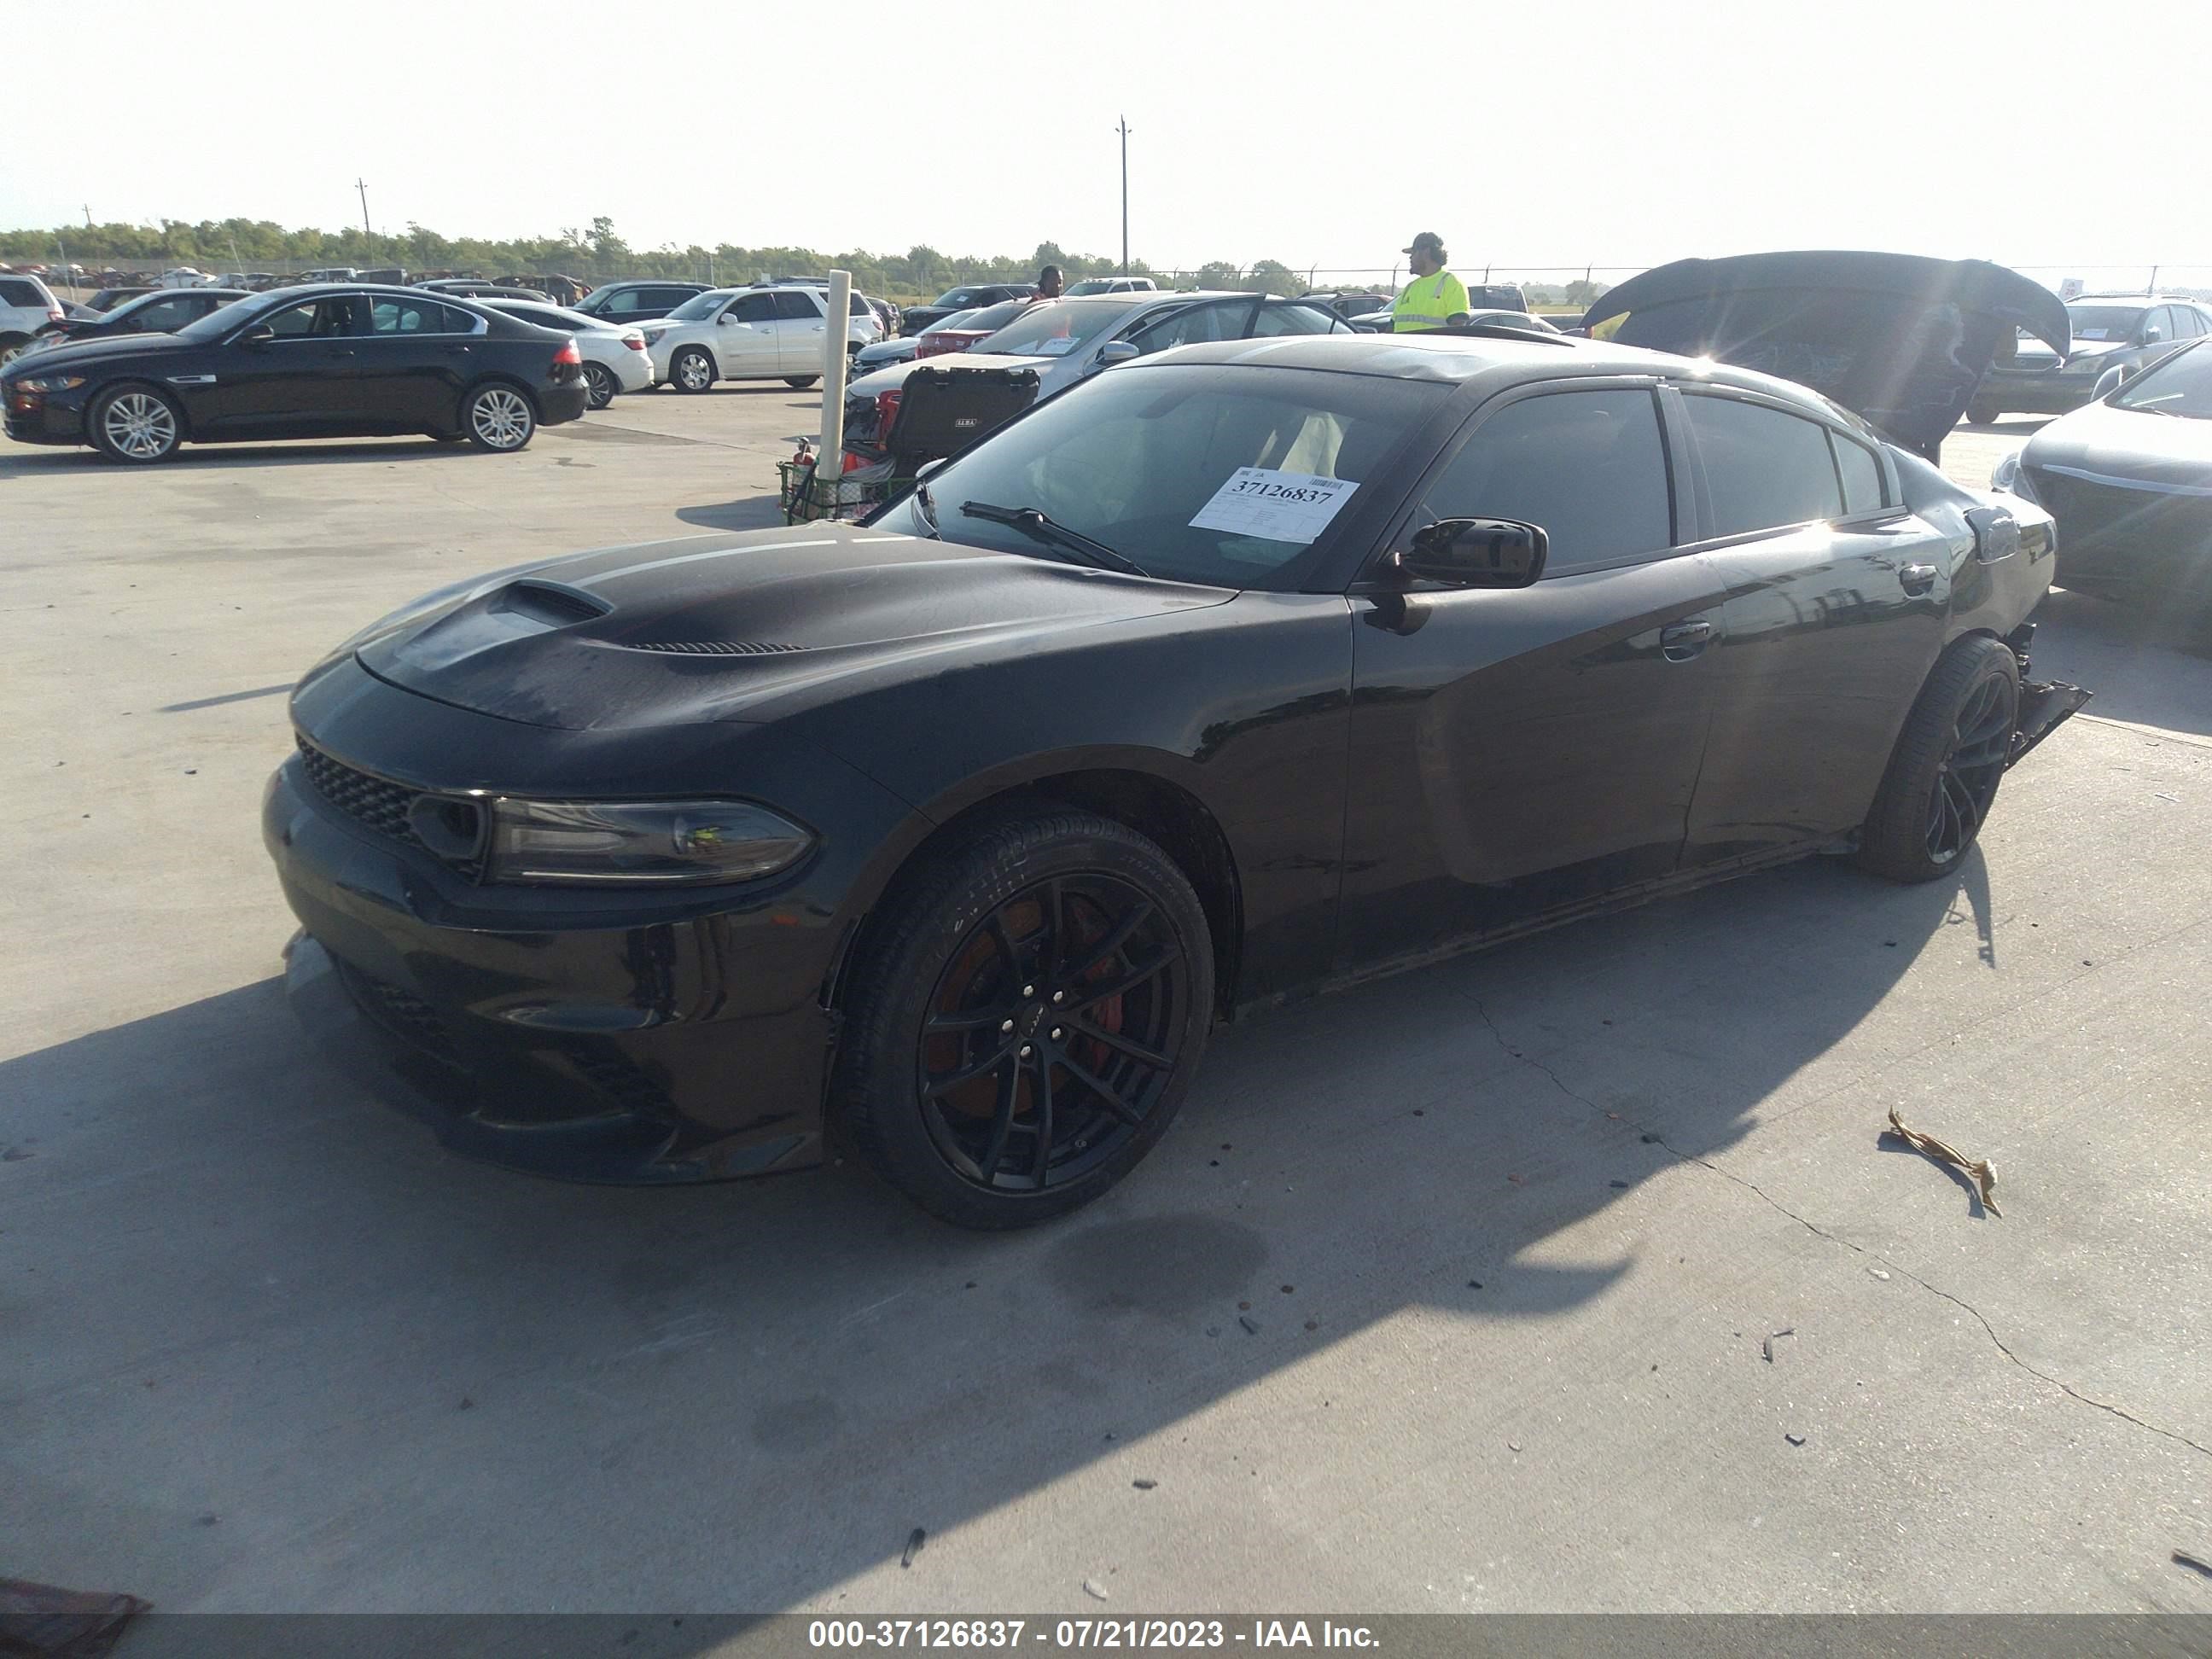 2C3CDXL91KH703260  - DODGE CHARGER  2019 IMG - 1